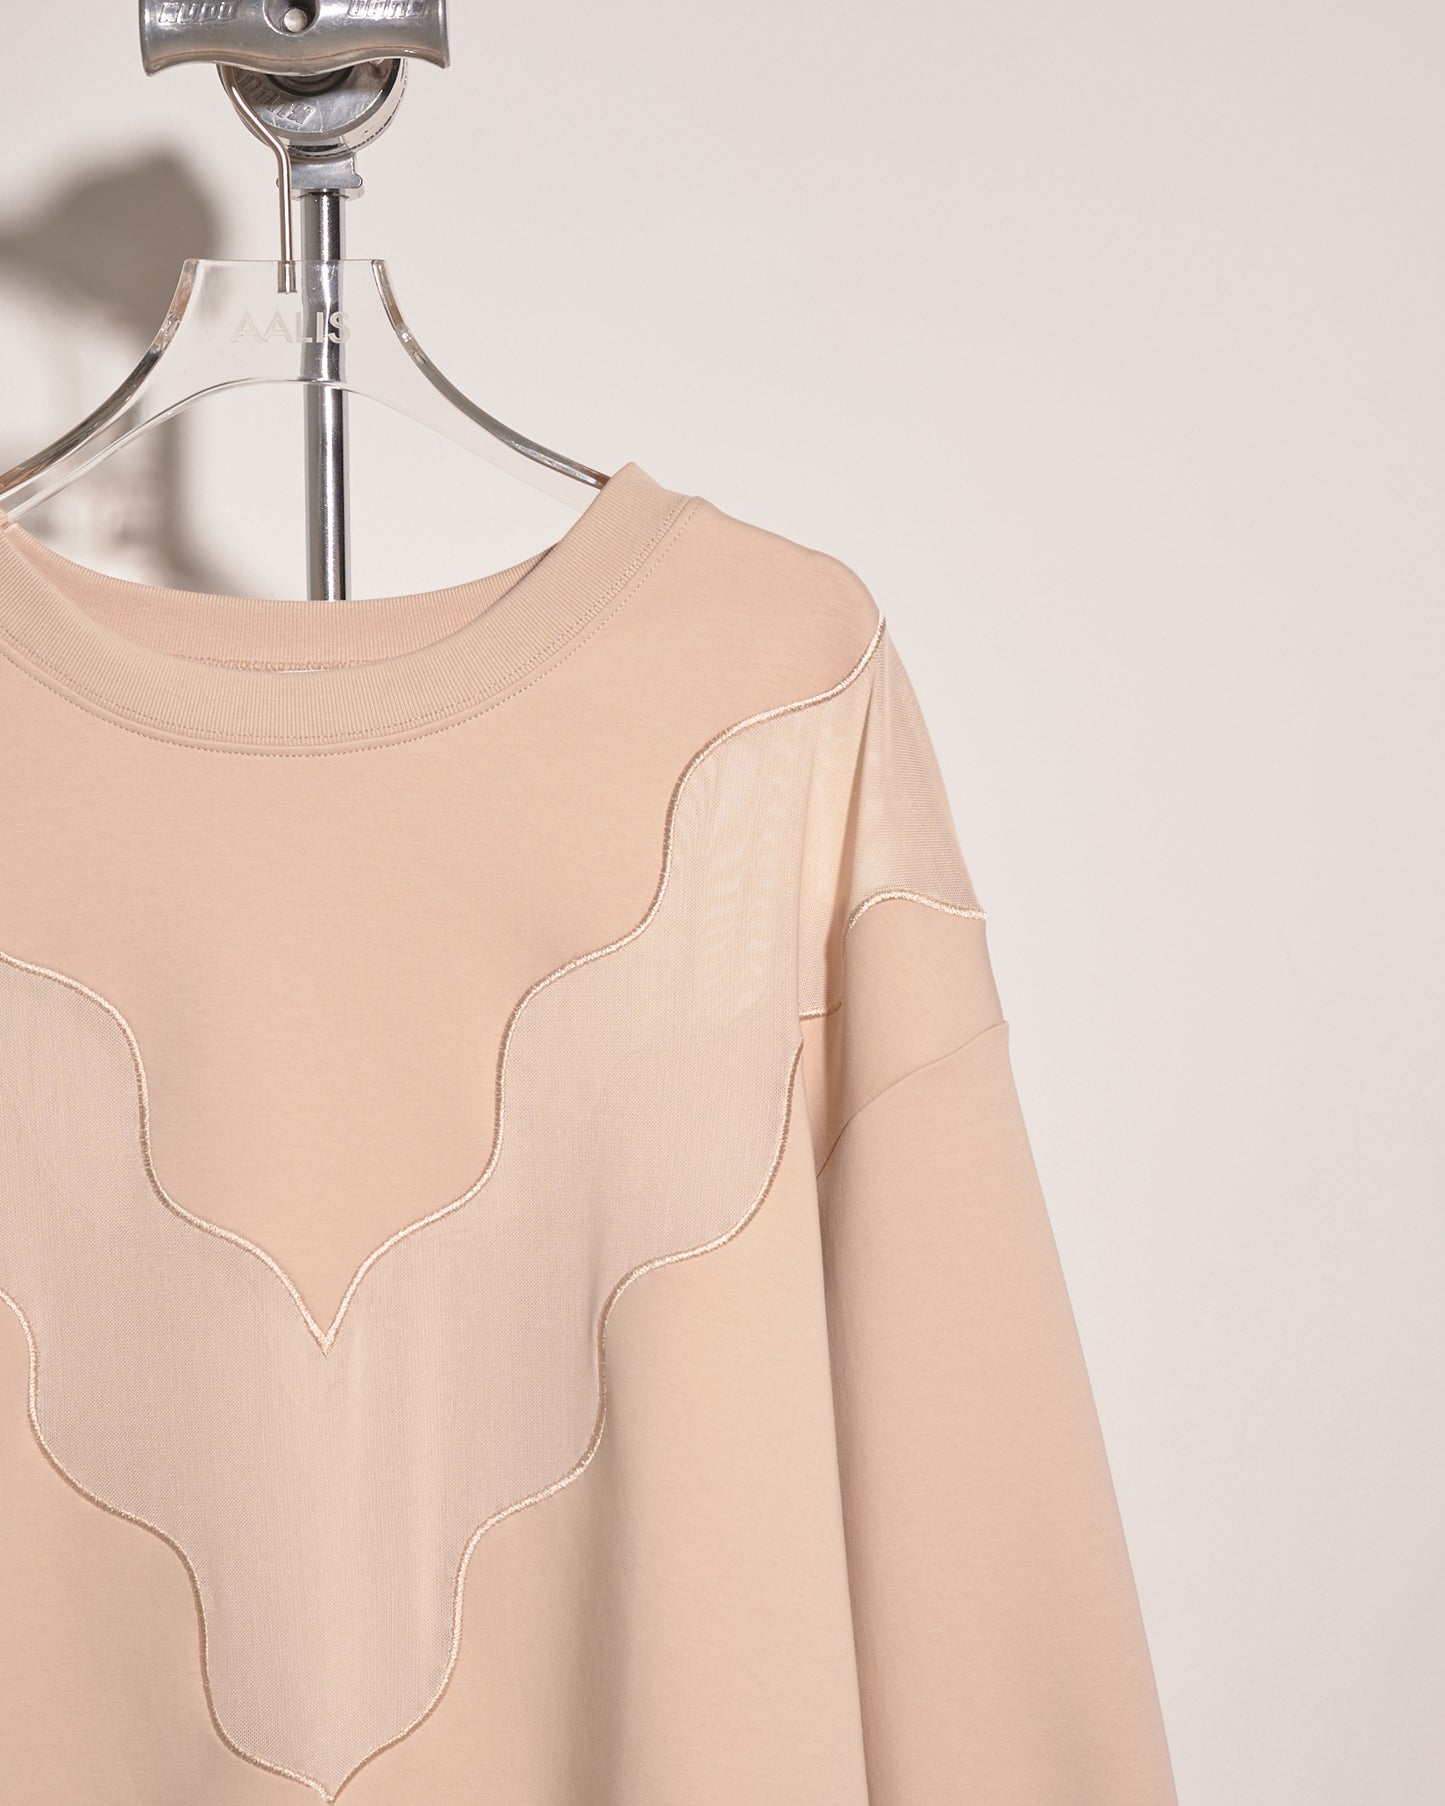 aalis OMIN V shape embroidered pullover (Beige)